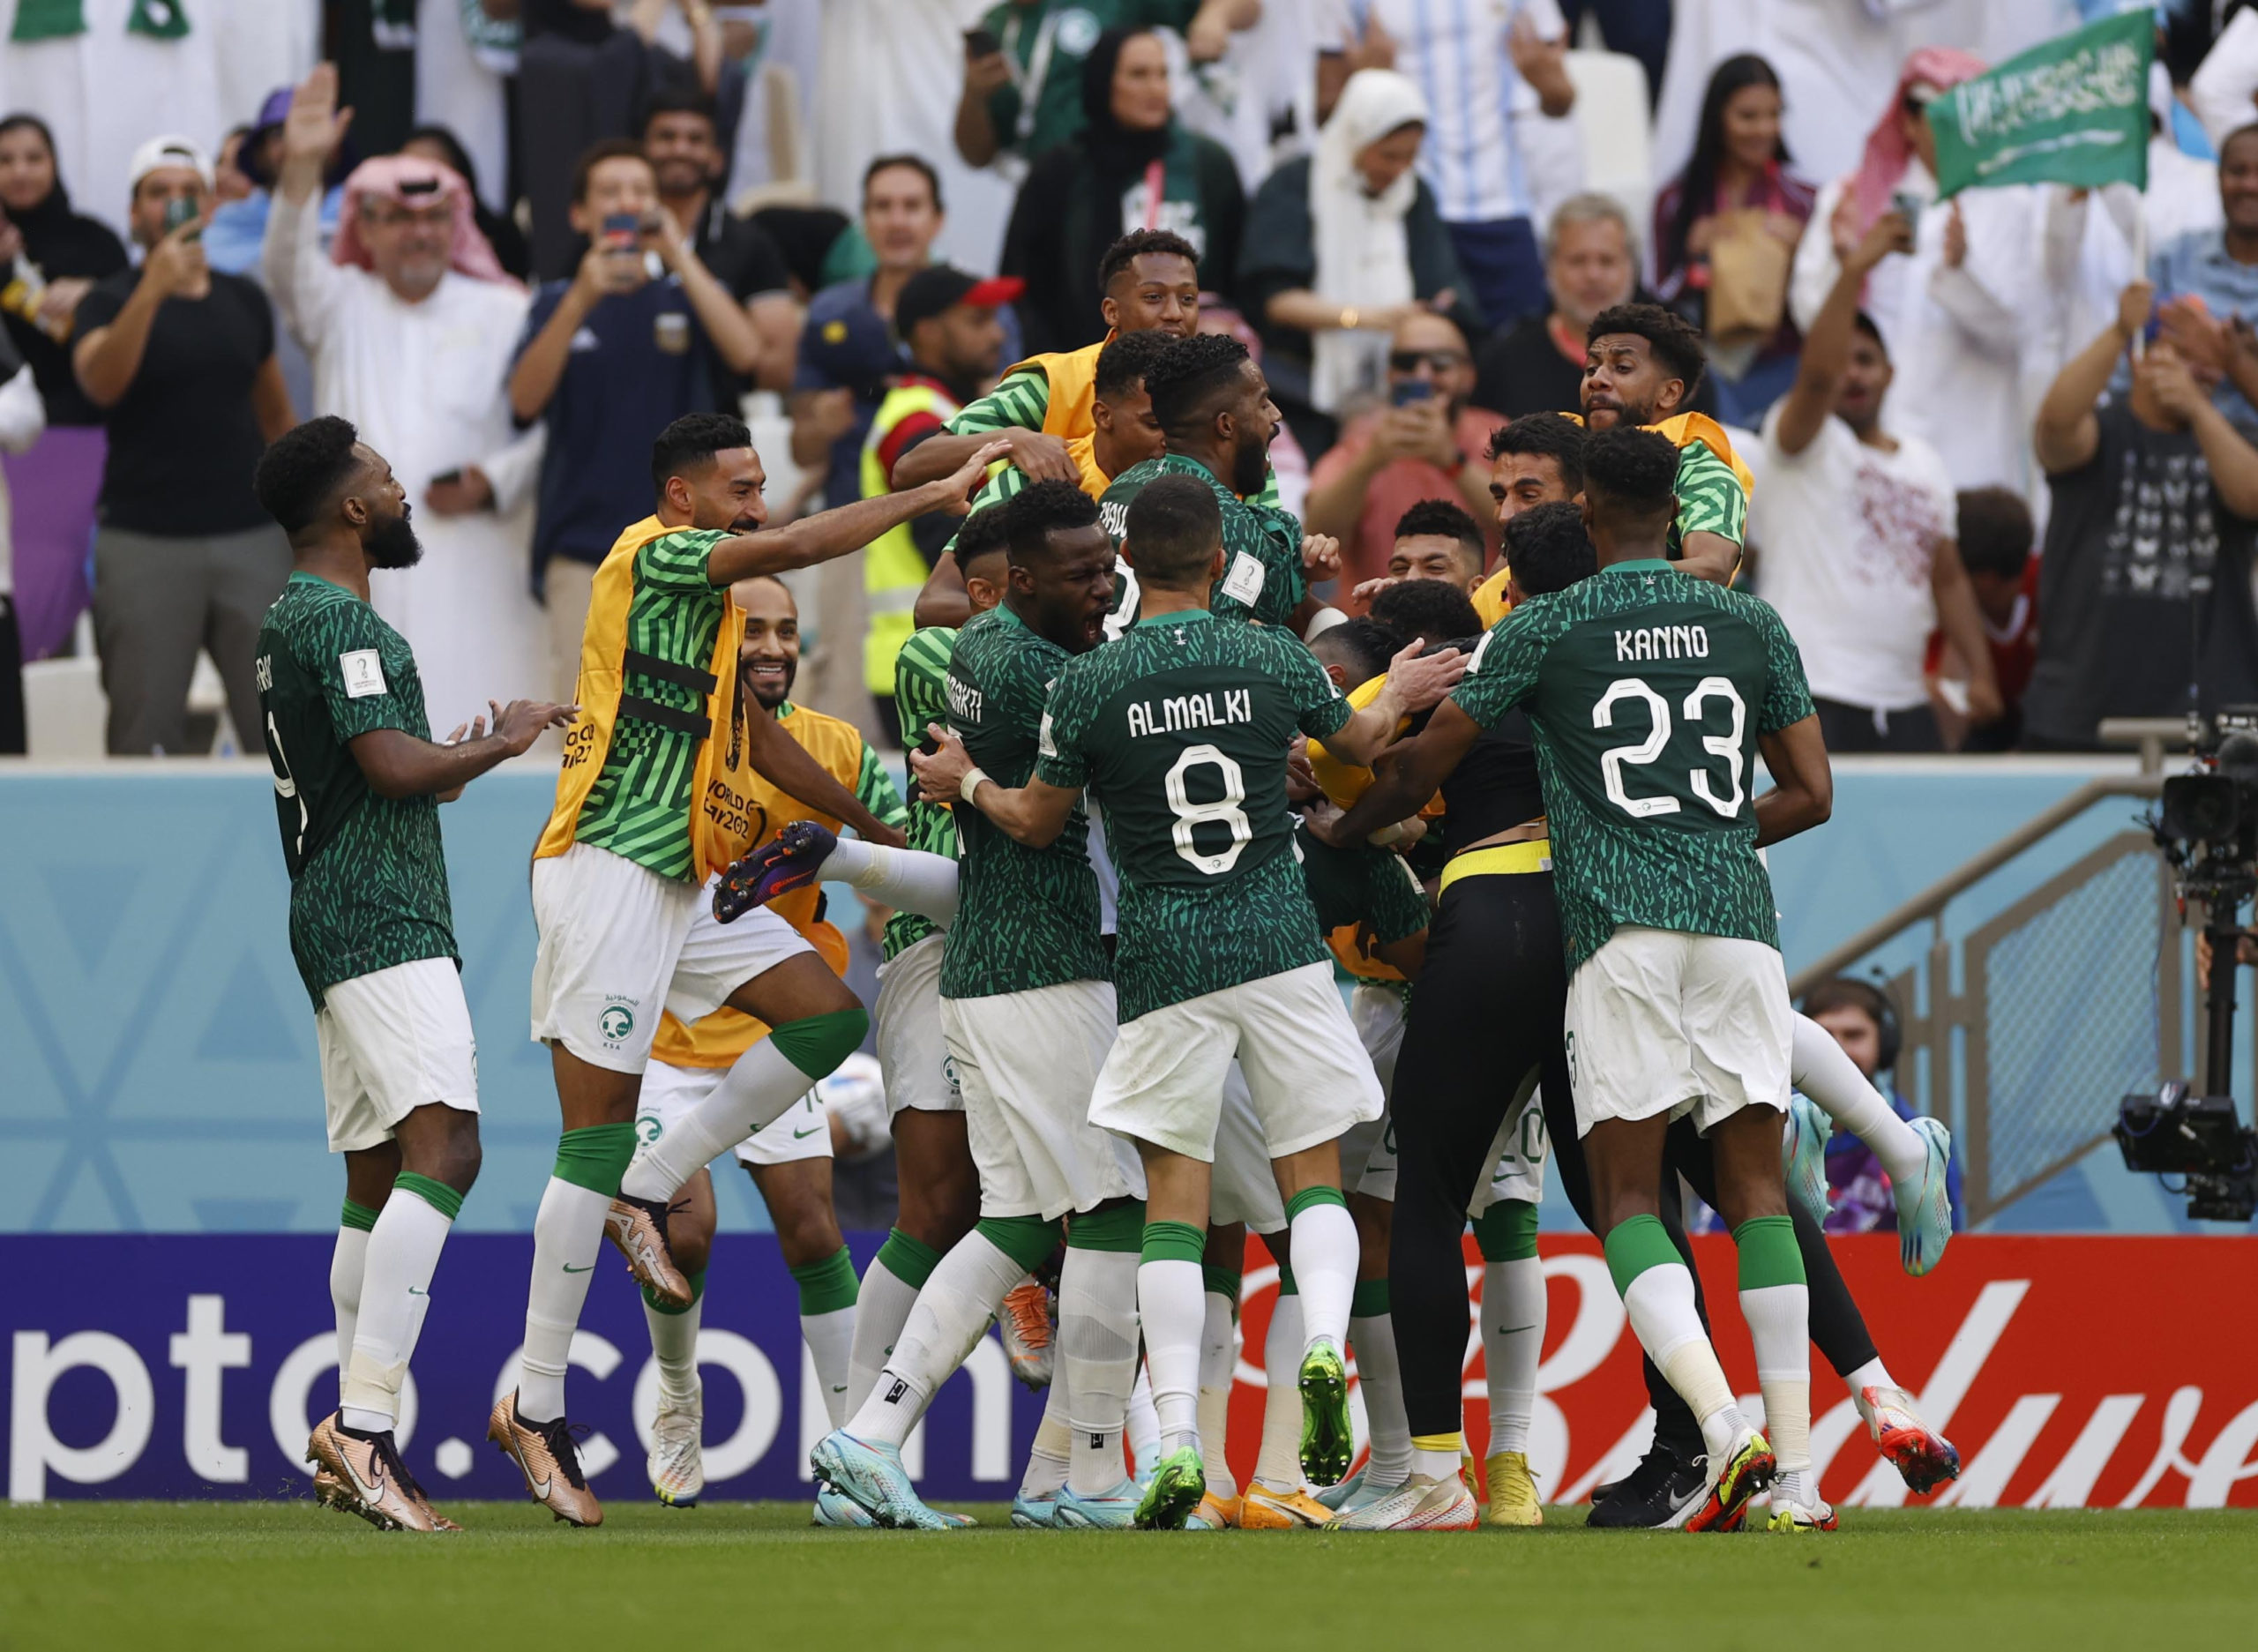 FILE PHOTO: Saudi Arabia midfielder Salem Al-Dawsari (10) is congratulated by teammates after scoring a goal against Argentina during a group stage match during the 2022 World Cup at Lusail Stadium. 